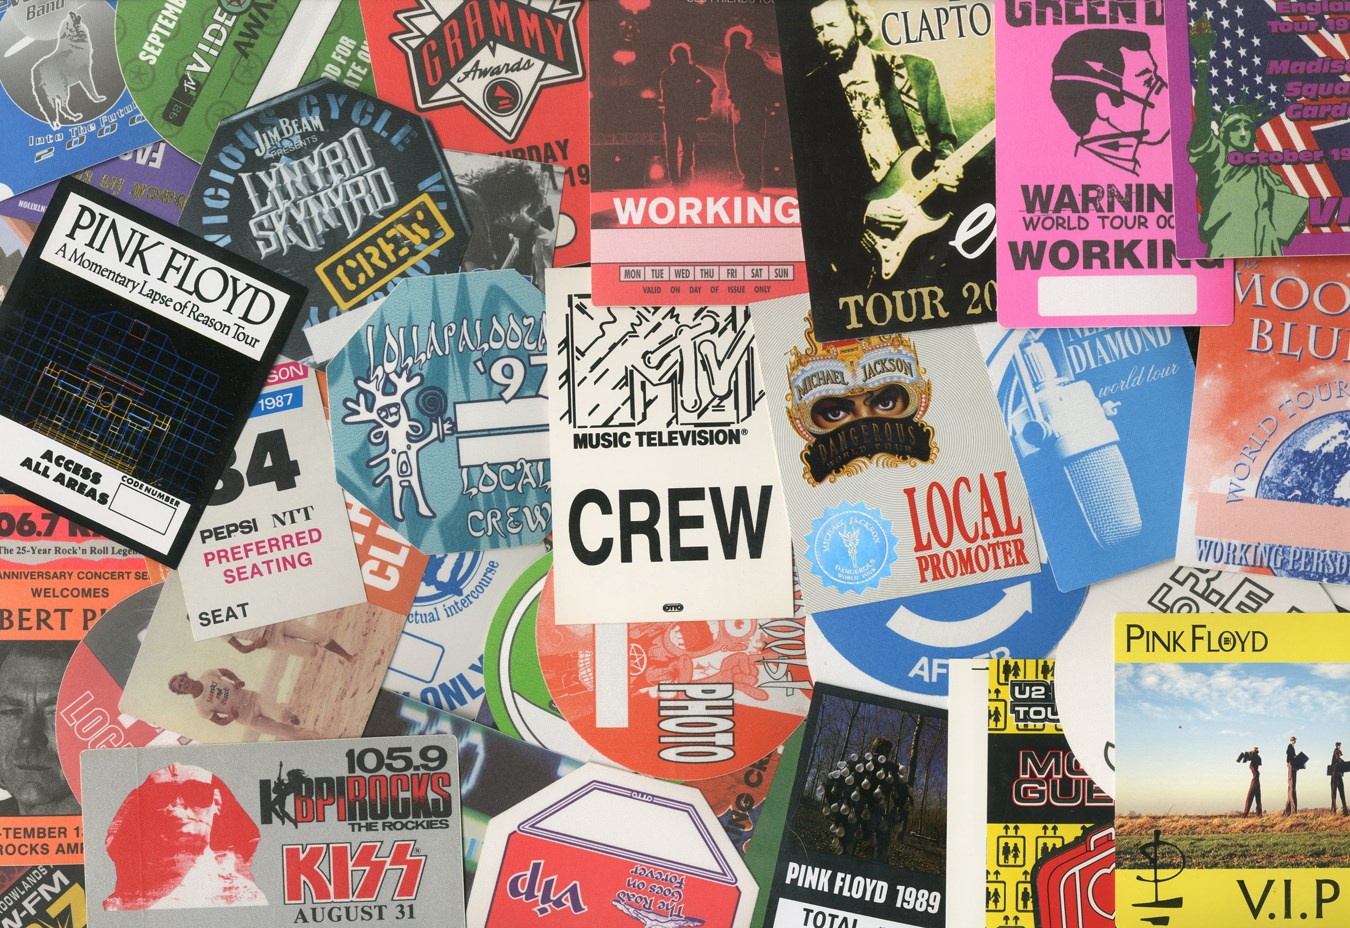 - Massive 1980s-90s Huge Rock Concert Backstage Passes Collection from Otto (450+)